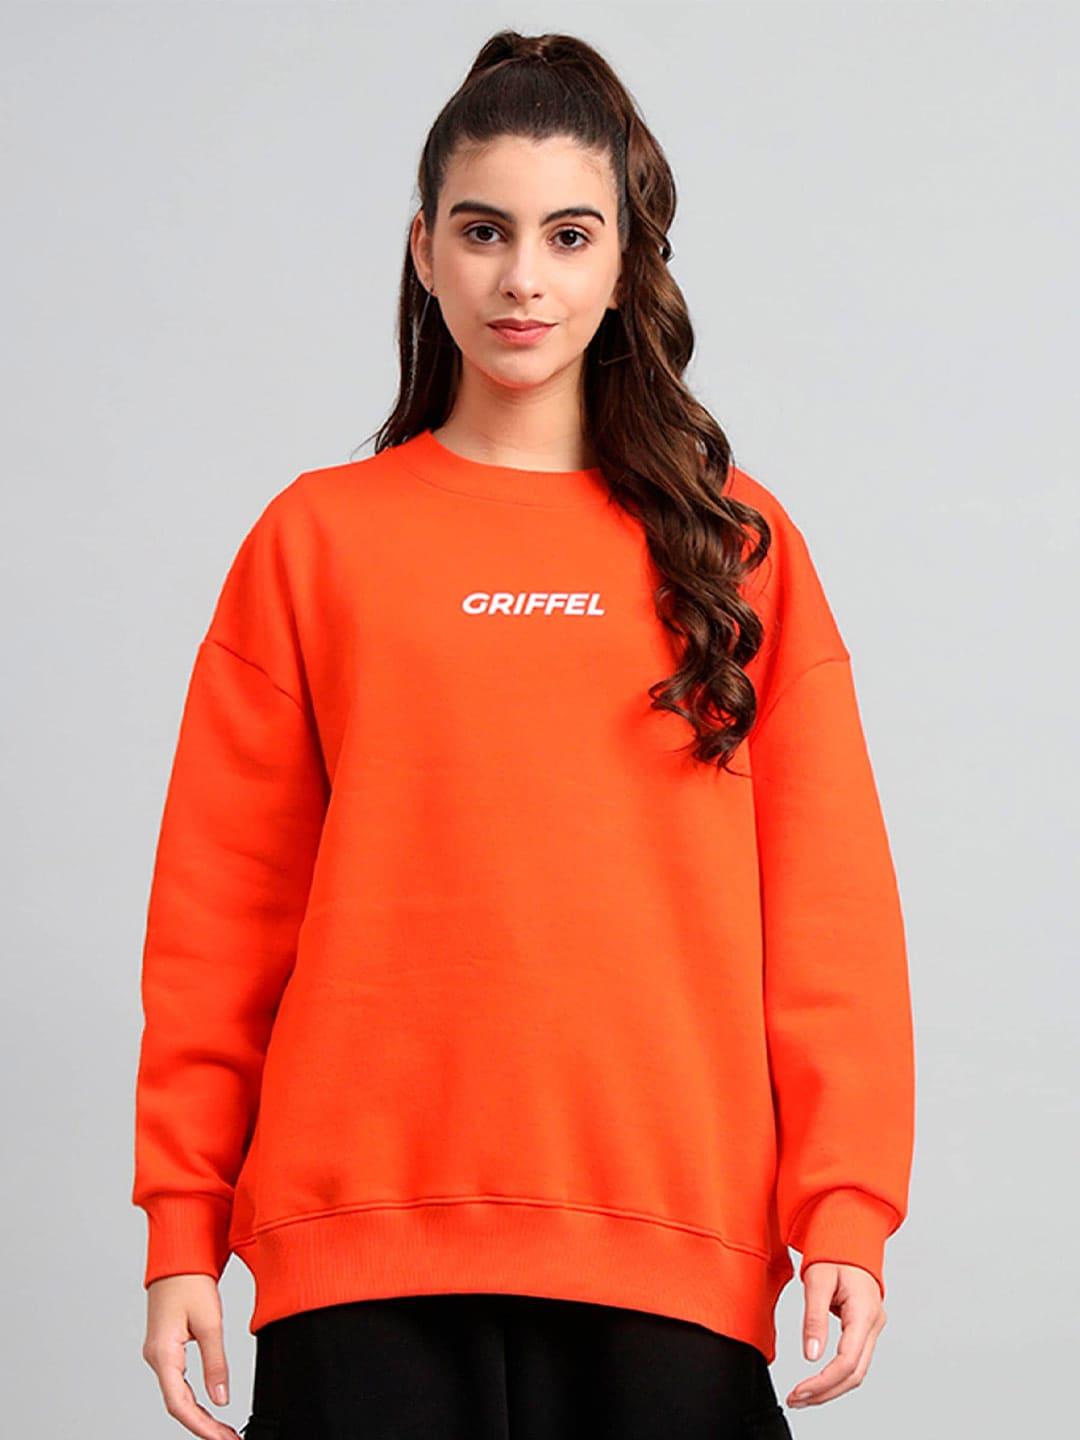 griffel-typography-printed-fleece-pullover